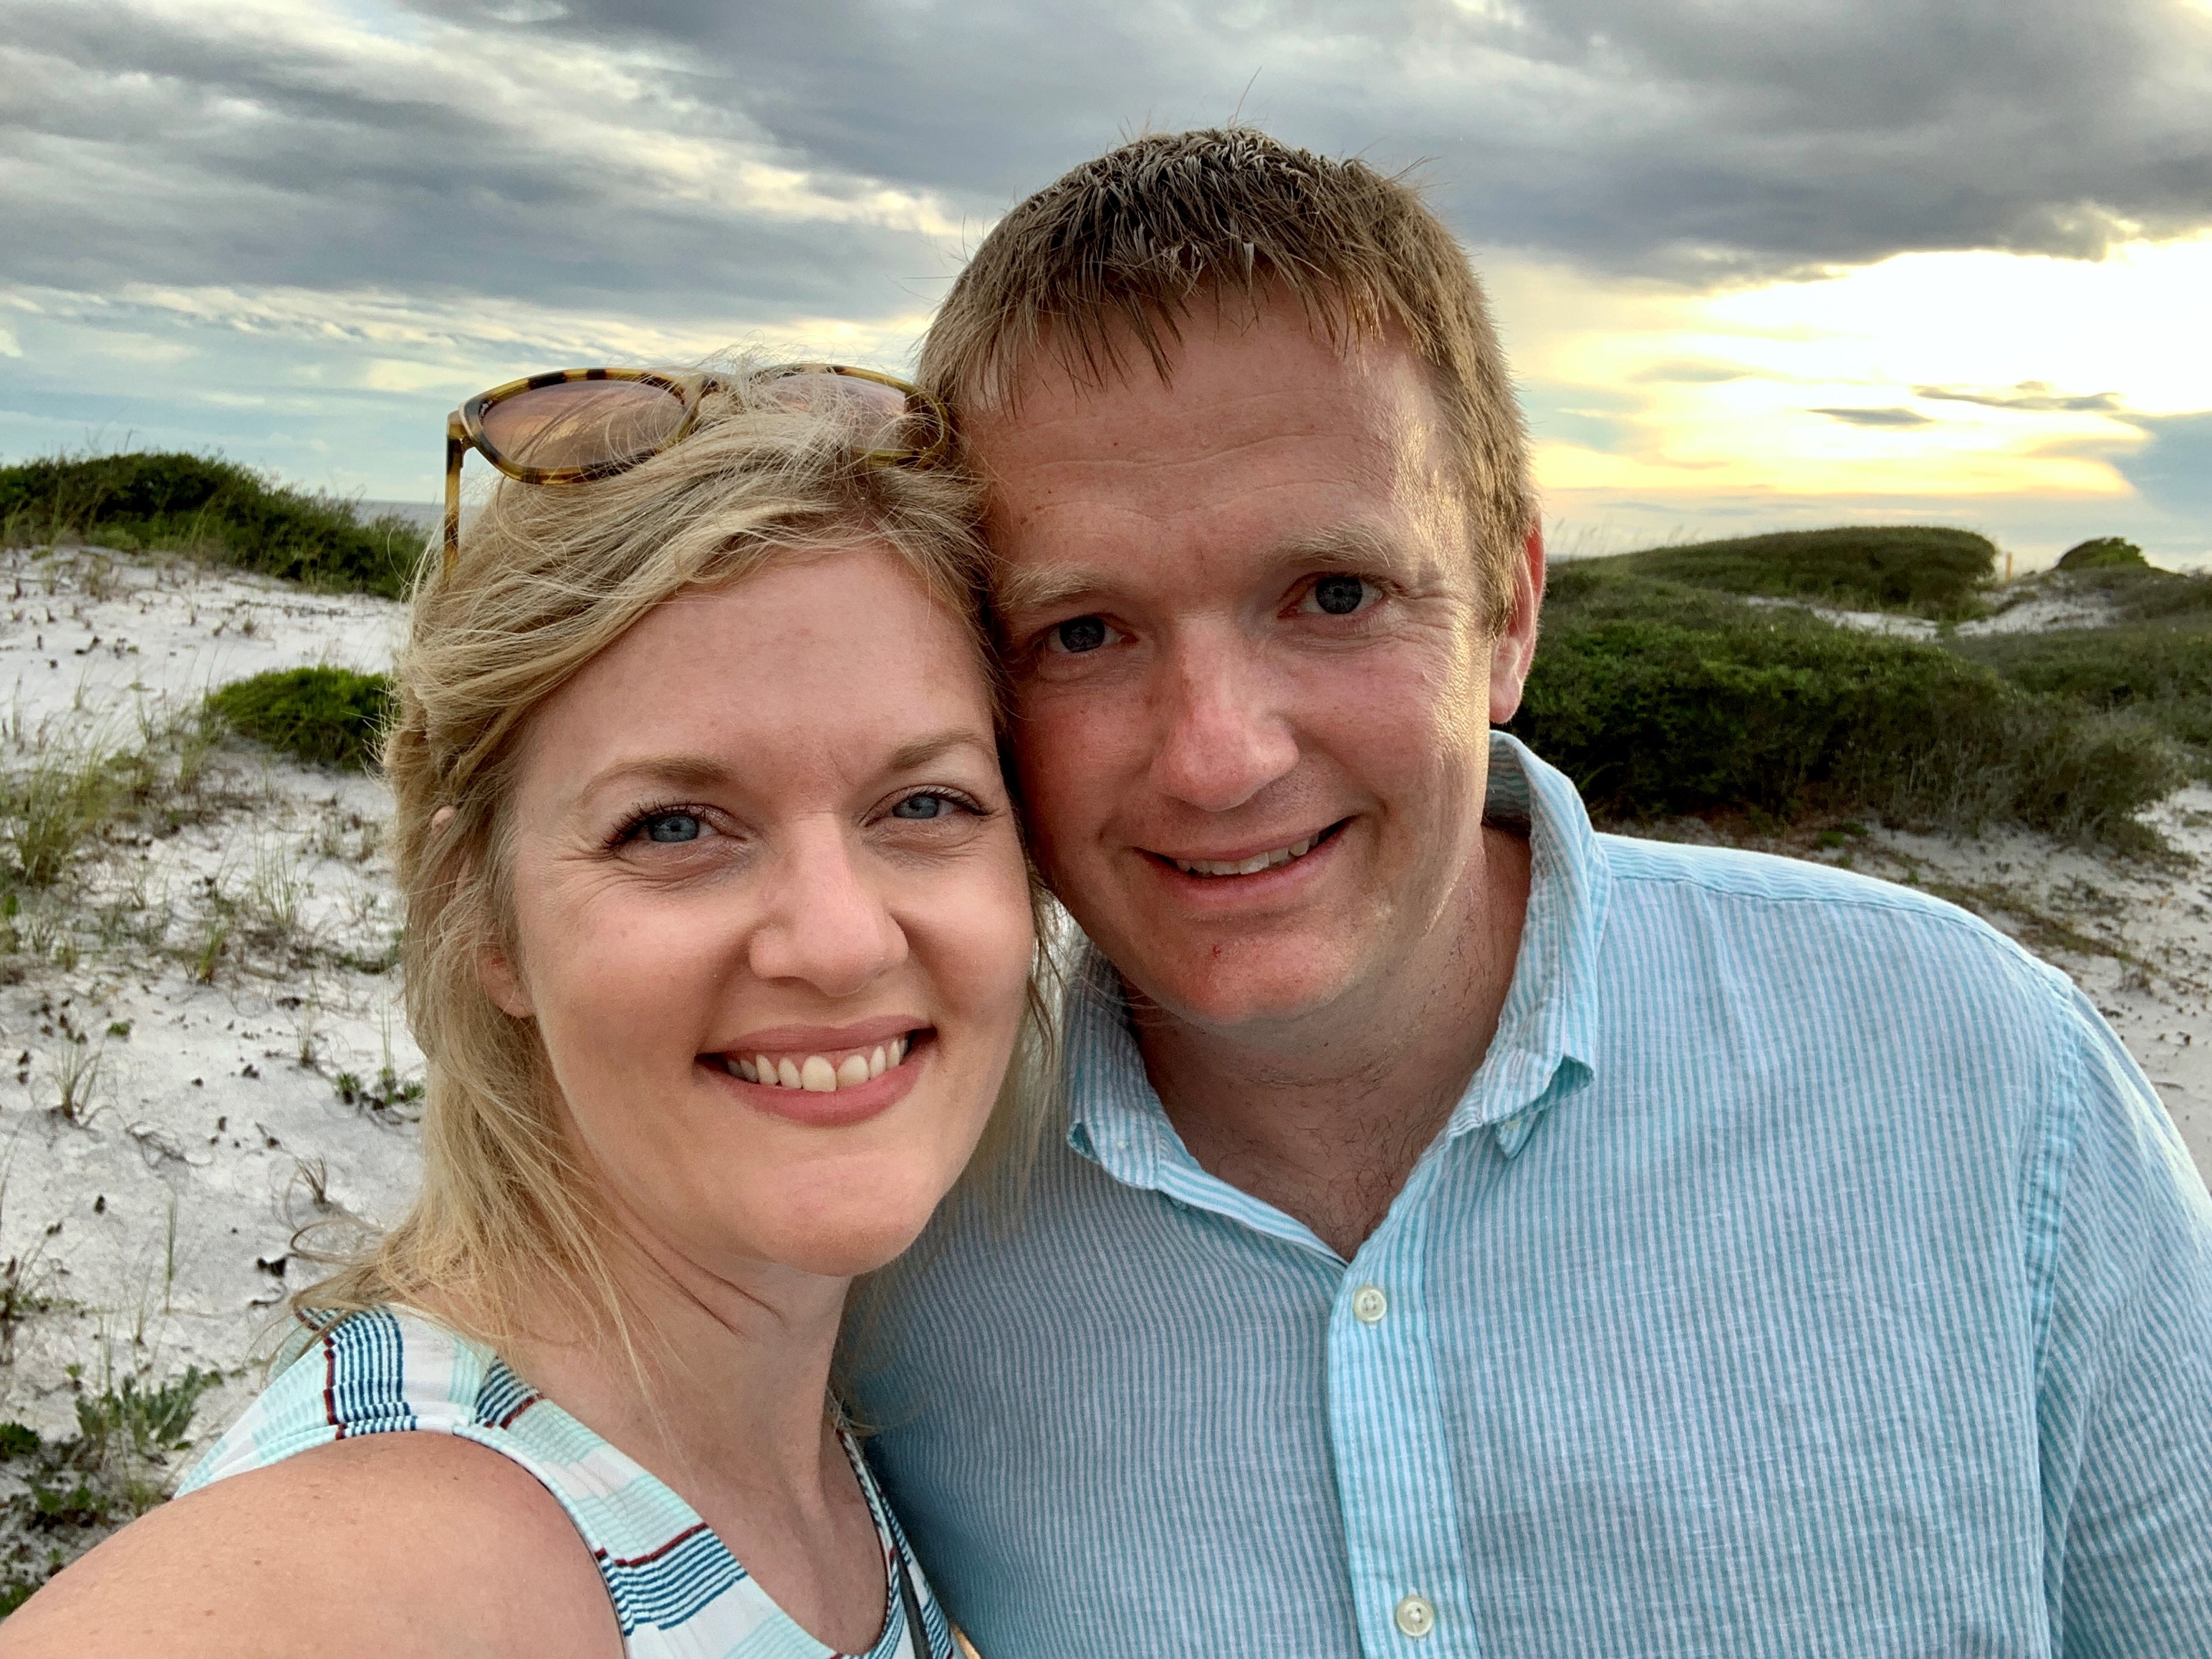 Attorney Matt Ellison and his wife Johanna have visited her ancestral home in Ireland several times. They’re planning a return trip this summer with their children, Rachael and Connor.